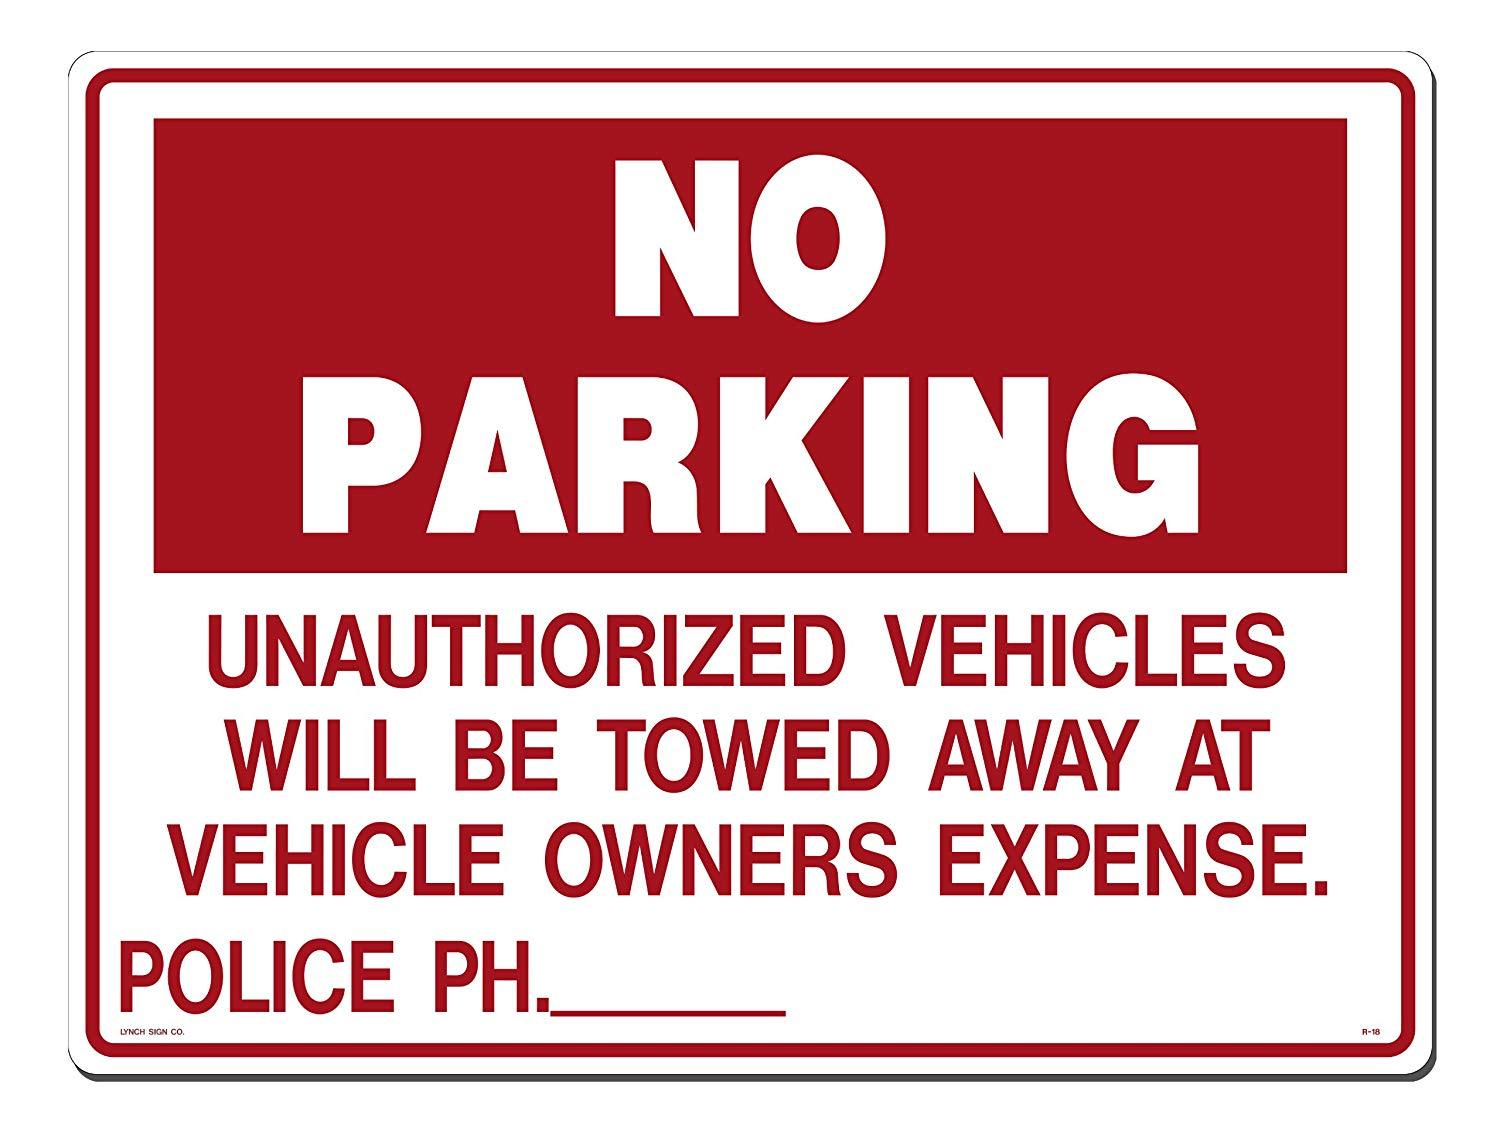 Lynch R-18, No Parking Unauthorized Vehicles Will Be Towed, 24" x 18"